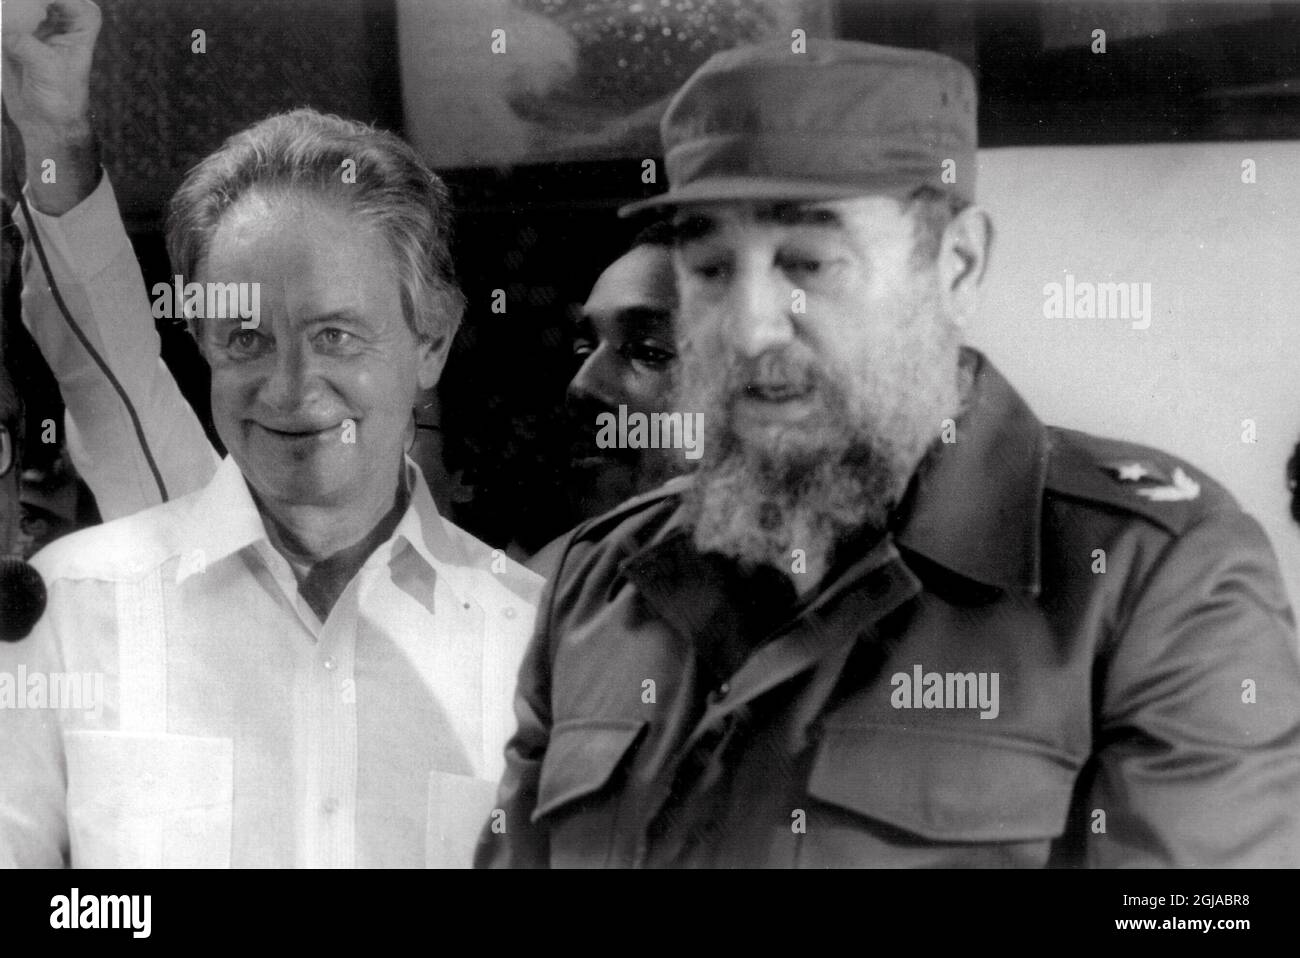 ARKIV NEW YORK 19751111 Swedens Prime Minister Olof Palme and Fidel Castro  during a visist by Palme to Cuba July 2,1975 Foto: Hasse Persson / EXP / TT  / Kod: 417 **SWEDEN OUT** Stock Photo - Alamy